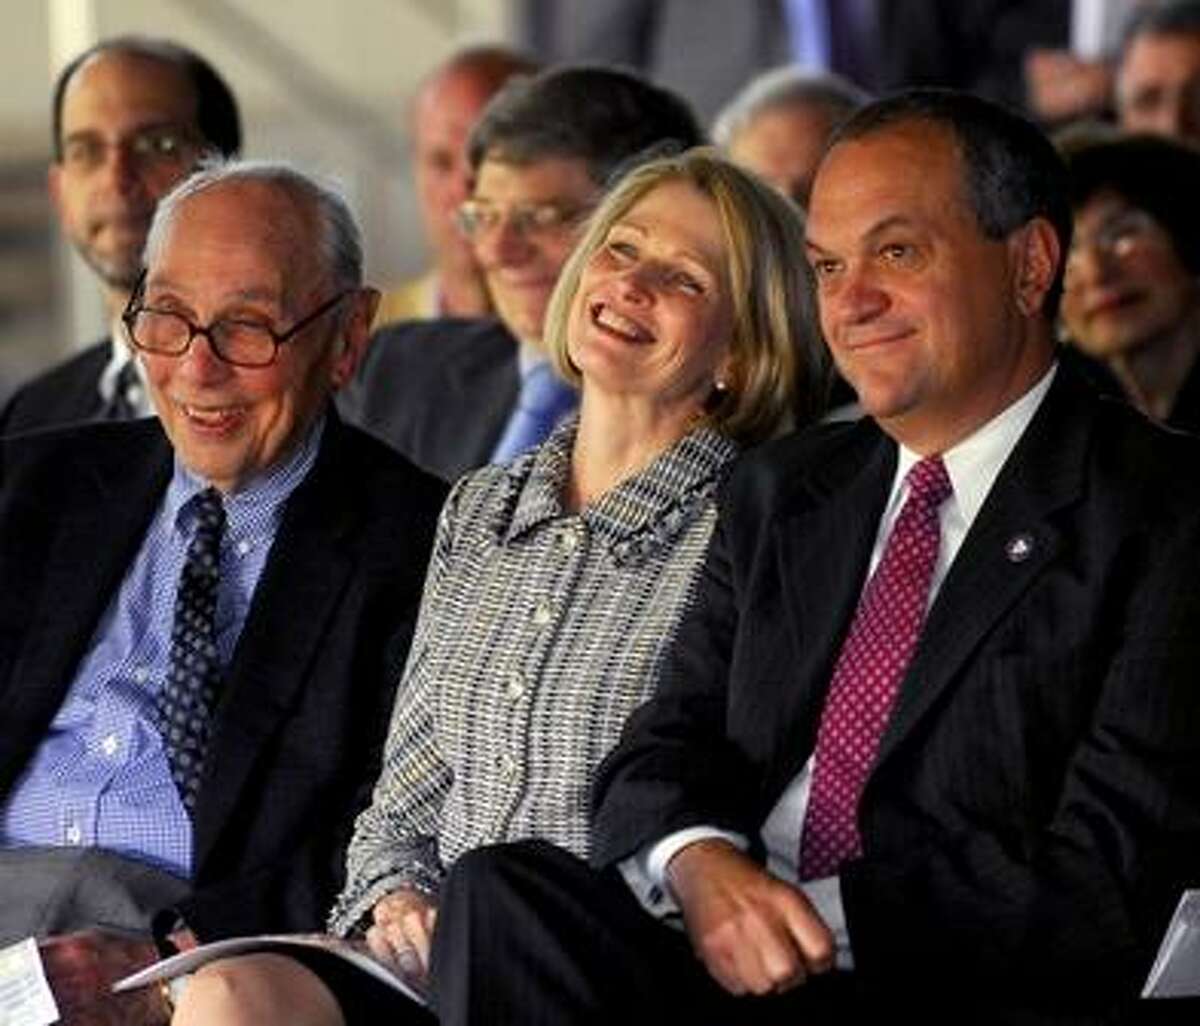 In this 2008 file photo: Edmund Fusco of the Fusco Corporation, left, Marna P. Borgstrom, President & CEO of Yale-New Haven Hospital, center and Mayor John DeStefano, listen to preliminary introductions during the Yale-New Haven Hospital Clinical Laboratory Building Groundbreaking ceremonies at 55 Park Street underneath the Air Rights Garage in New Haven Tuesday May, 27, 2008. ph848 #0937 Photography by PETER HVIZDAK